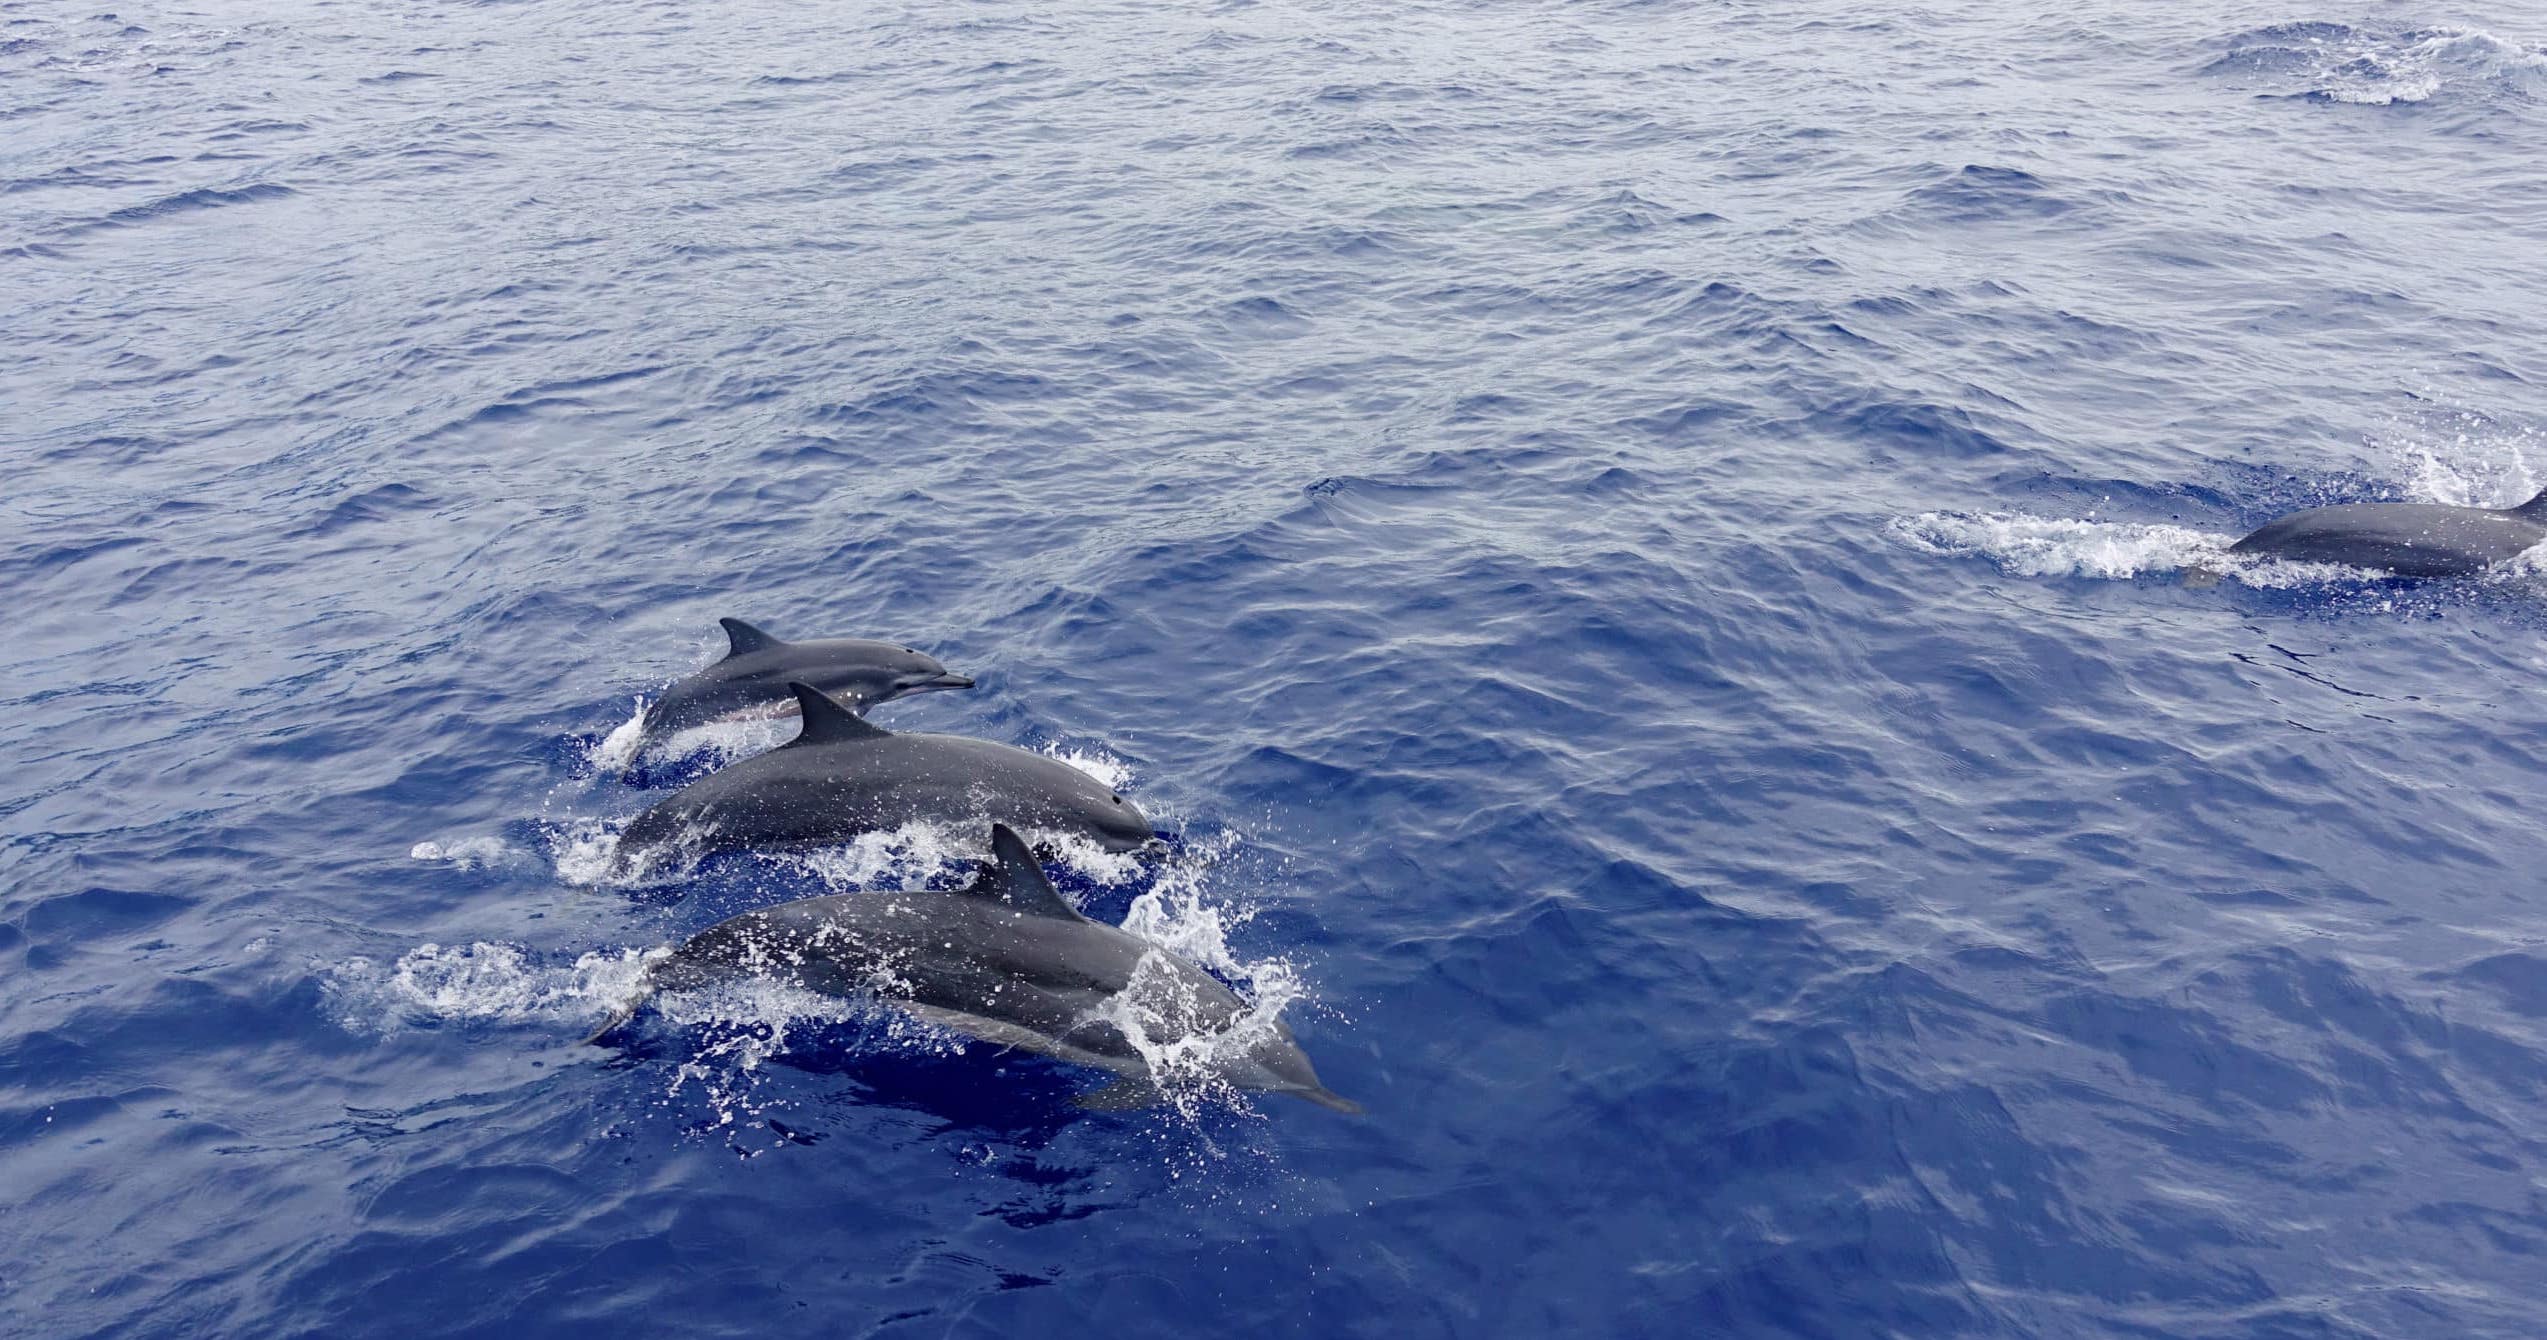 Dolphins off Maui